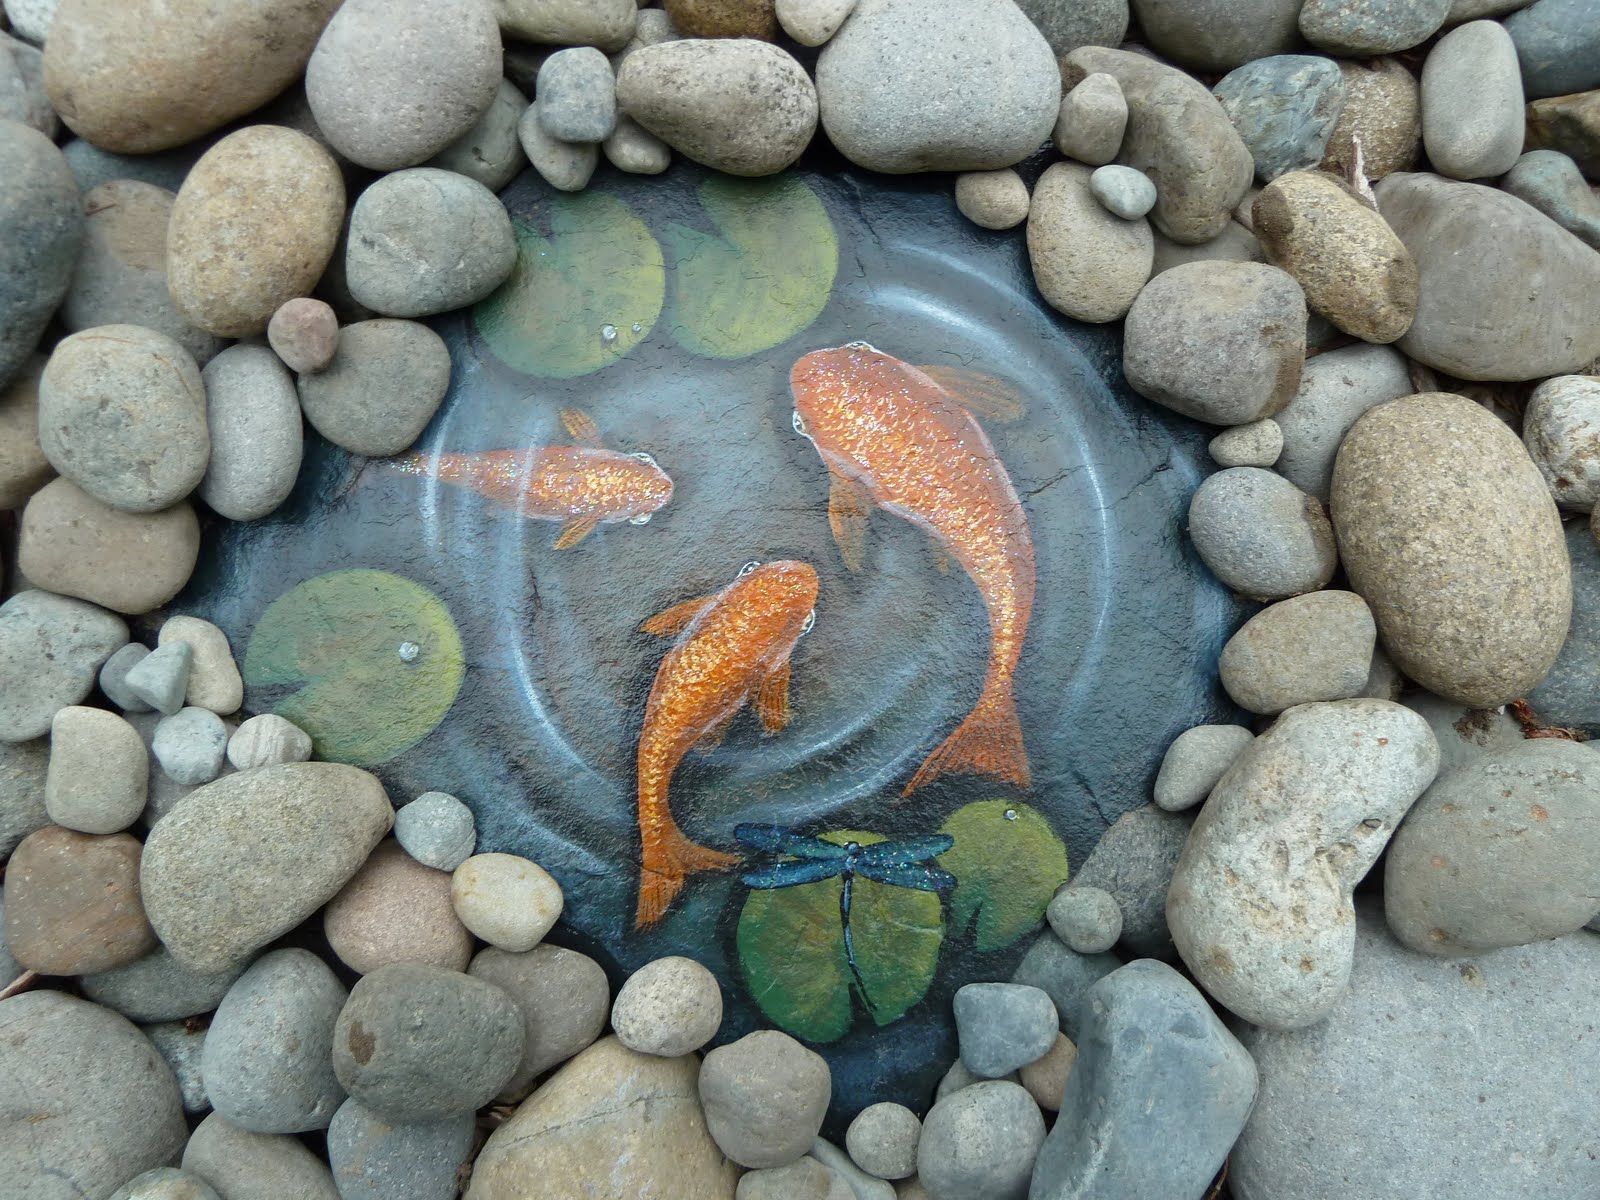 Water scene painted on slate, surrounded by river rock, looks cool!